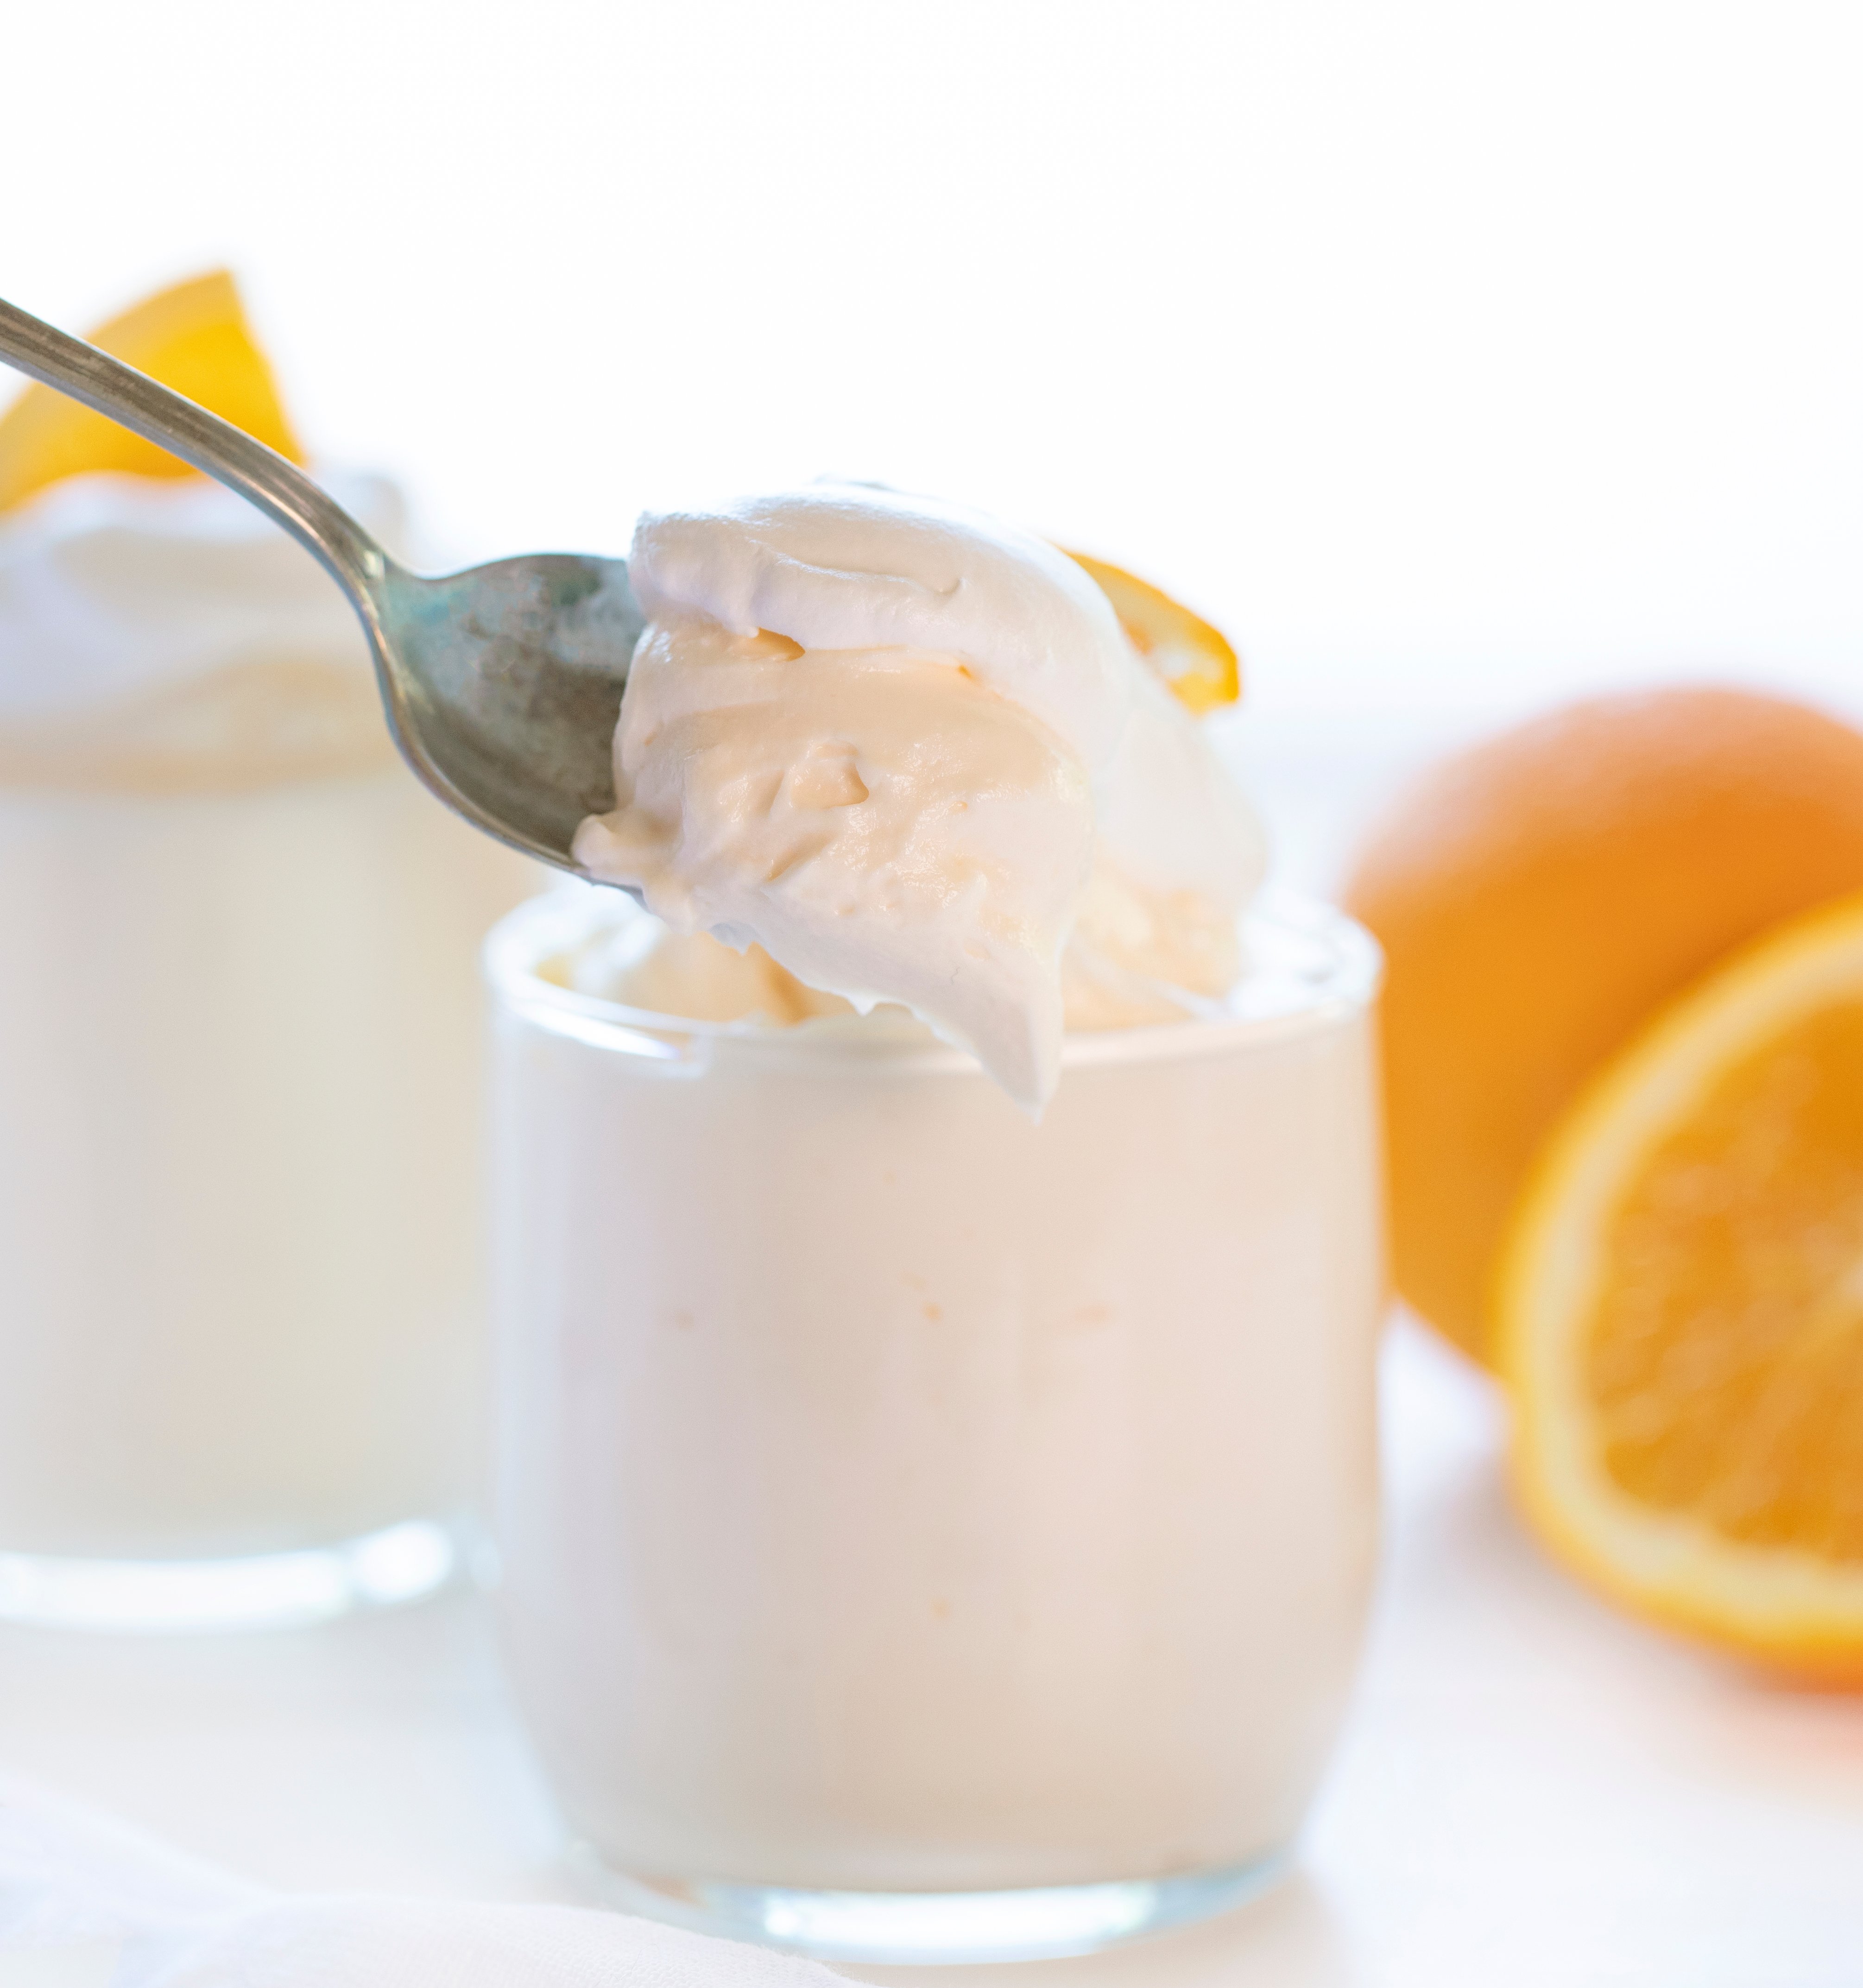 How to Make Creamsicle Mousse